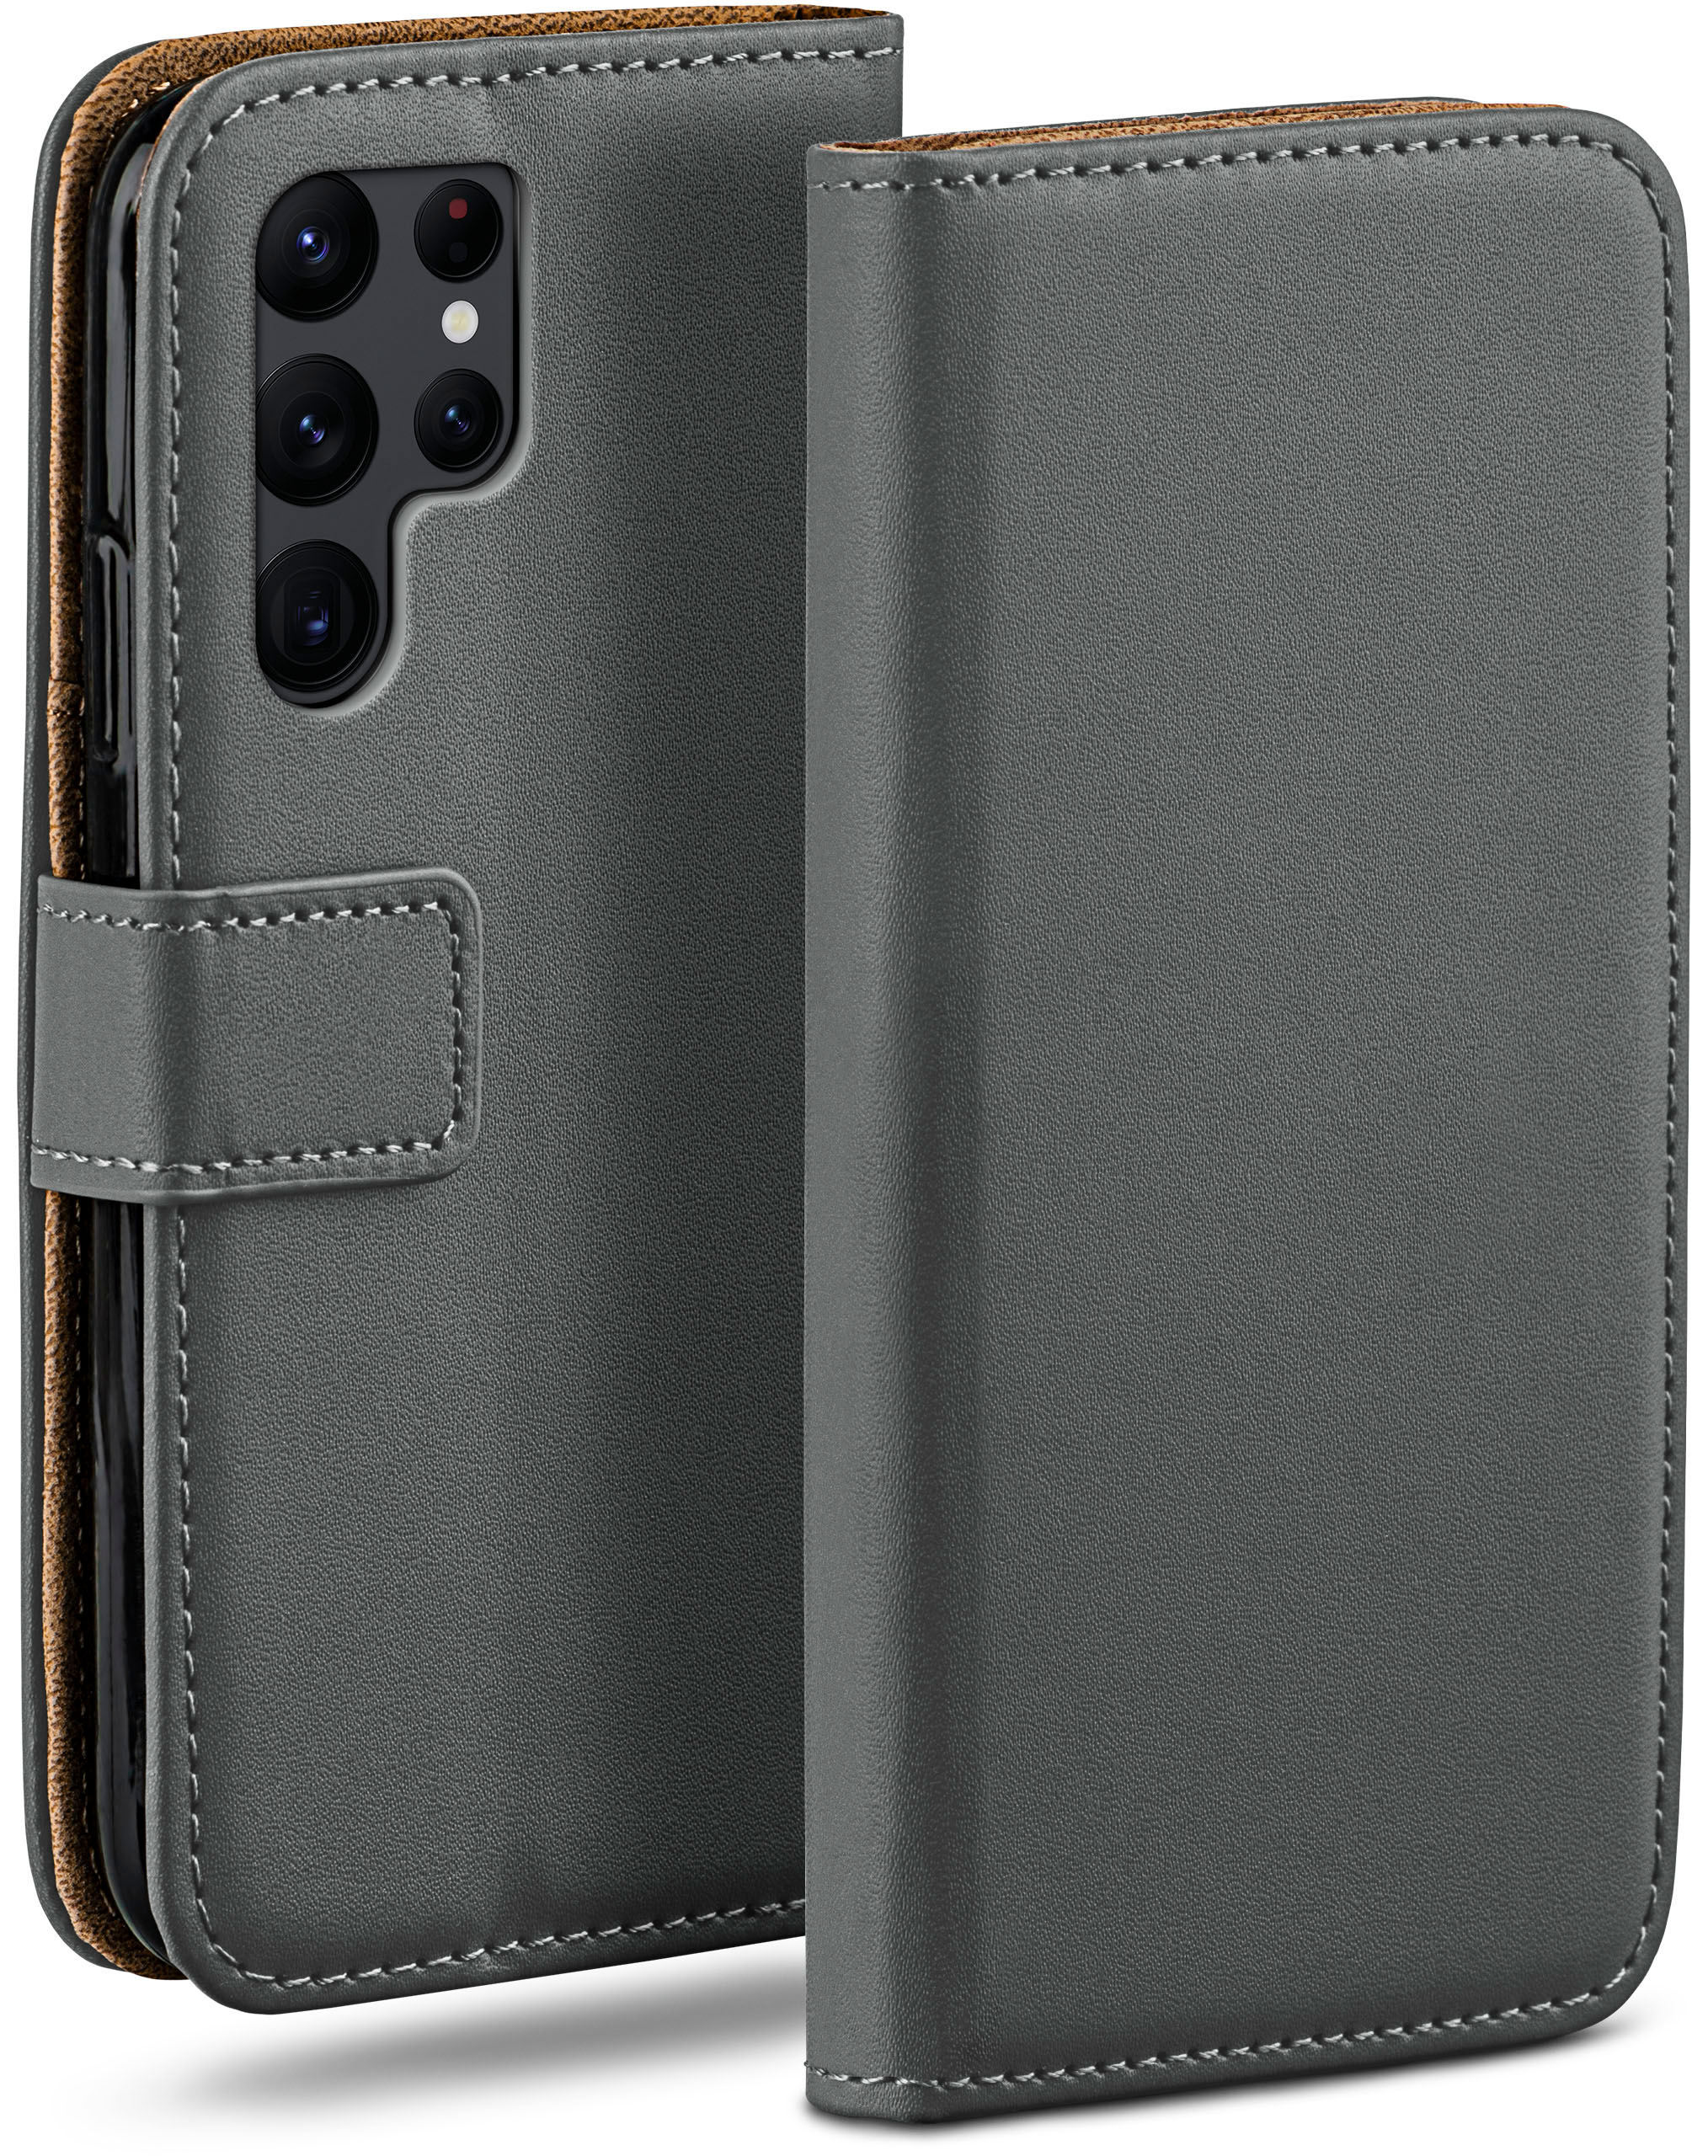 MOEX Book Ultra, S22 Galaxy Bookcover, Case, Anthracite-Gray Samsung,